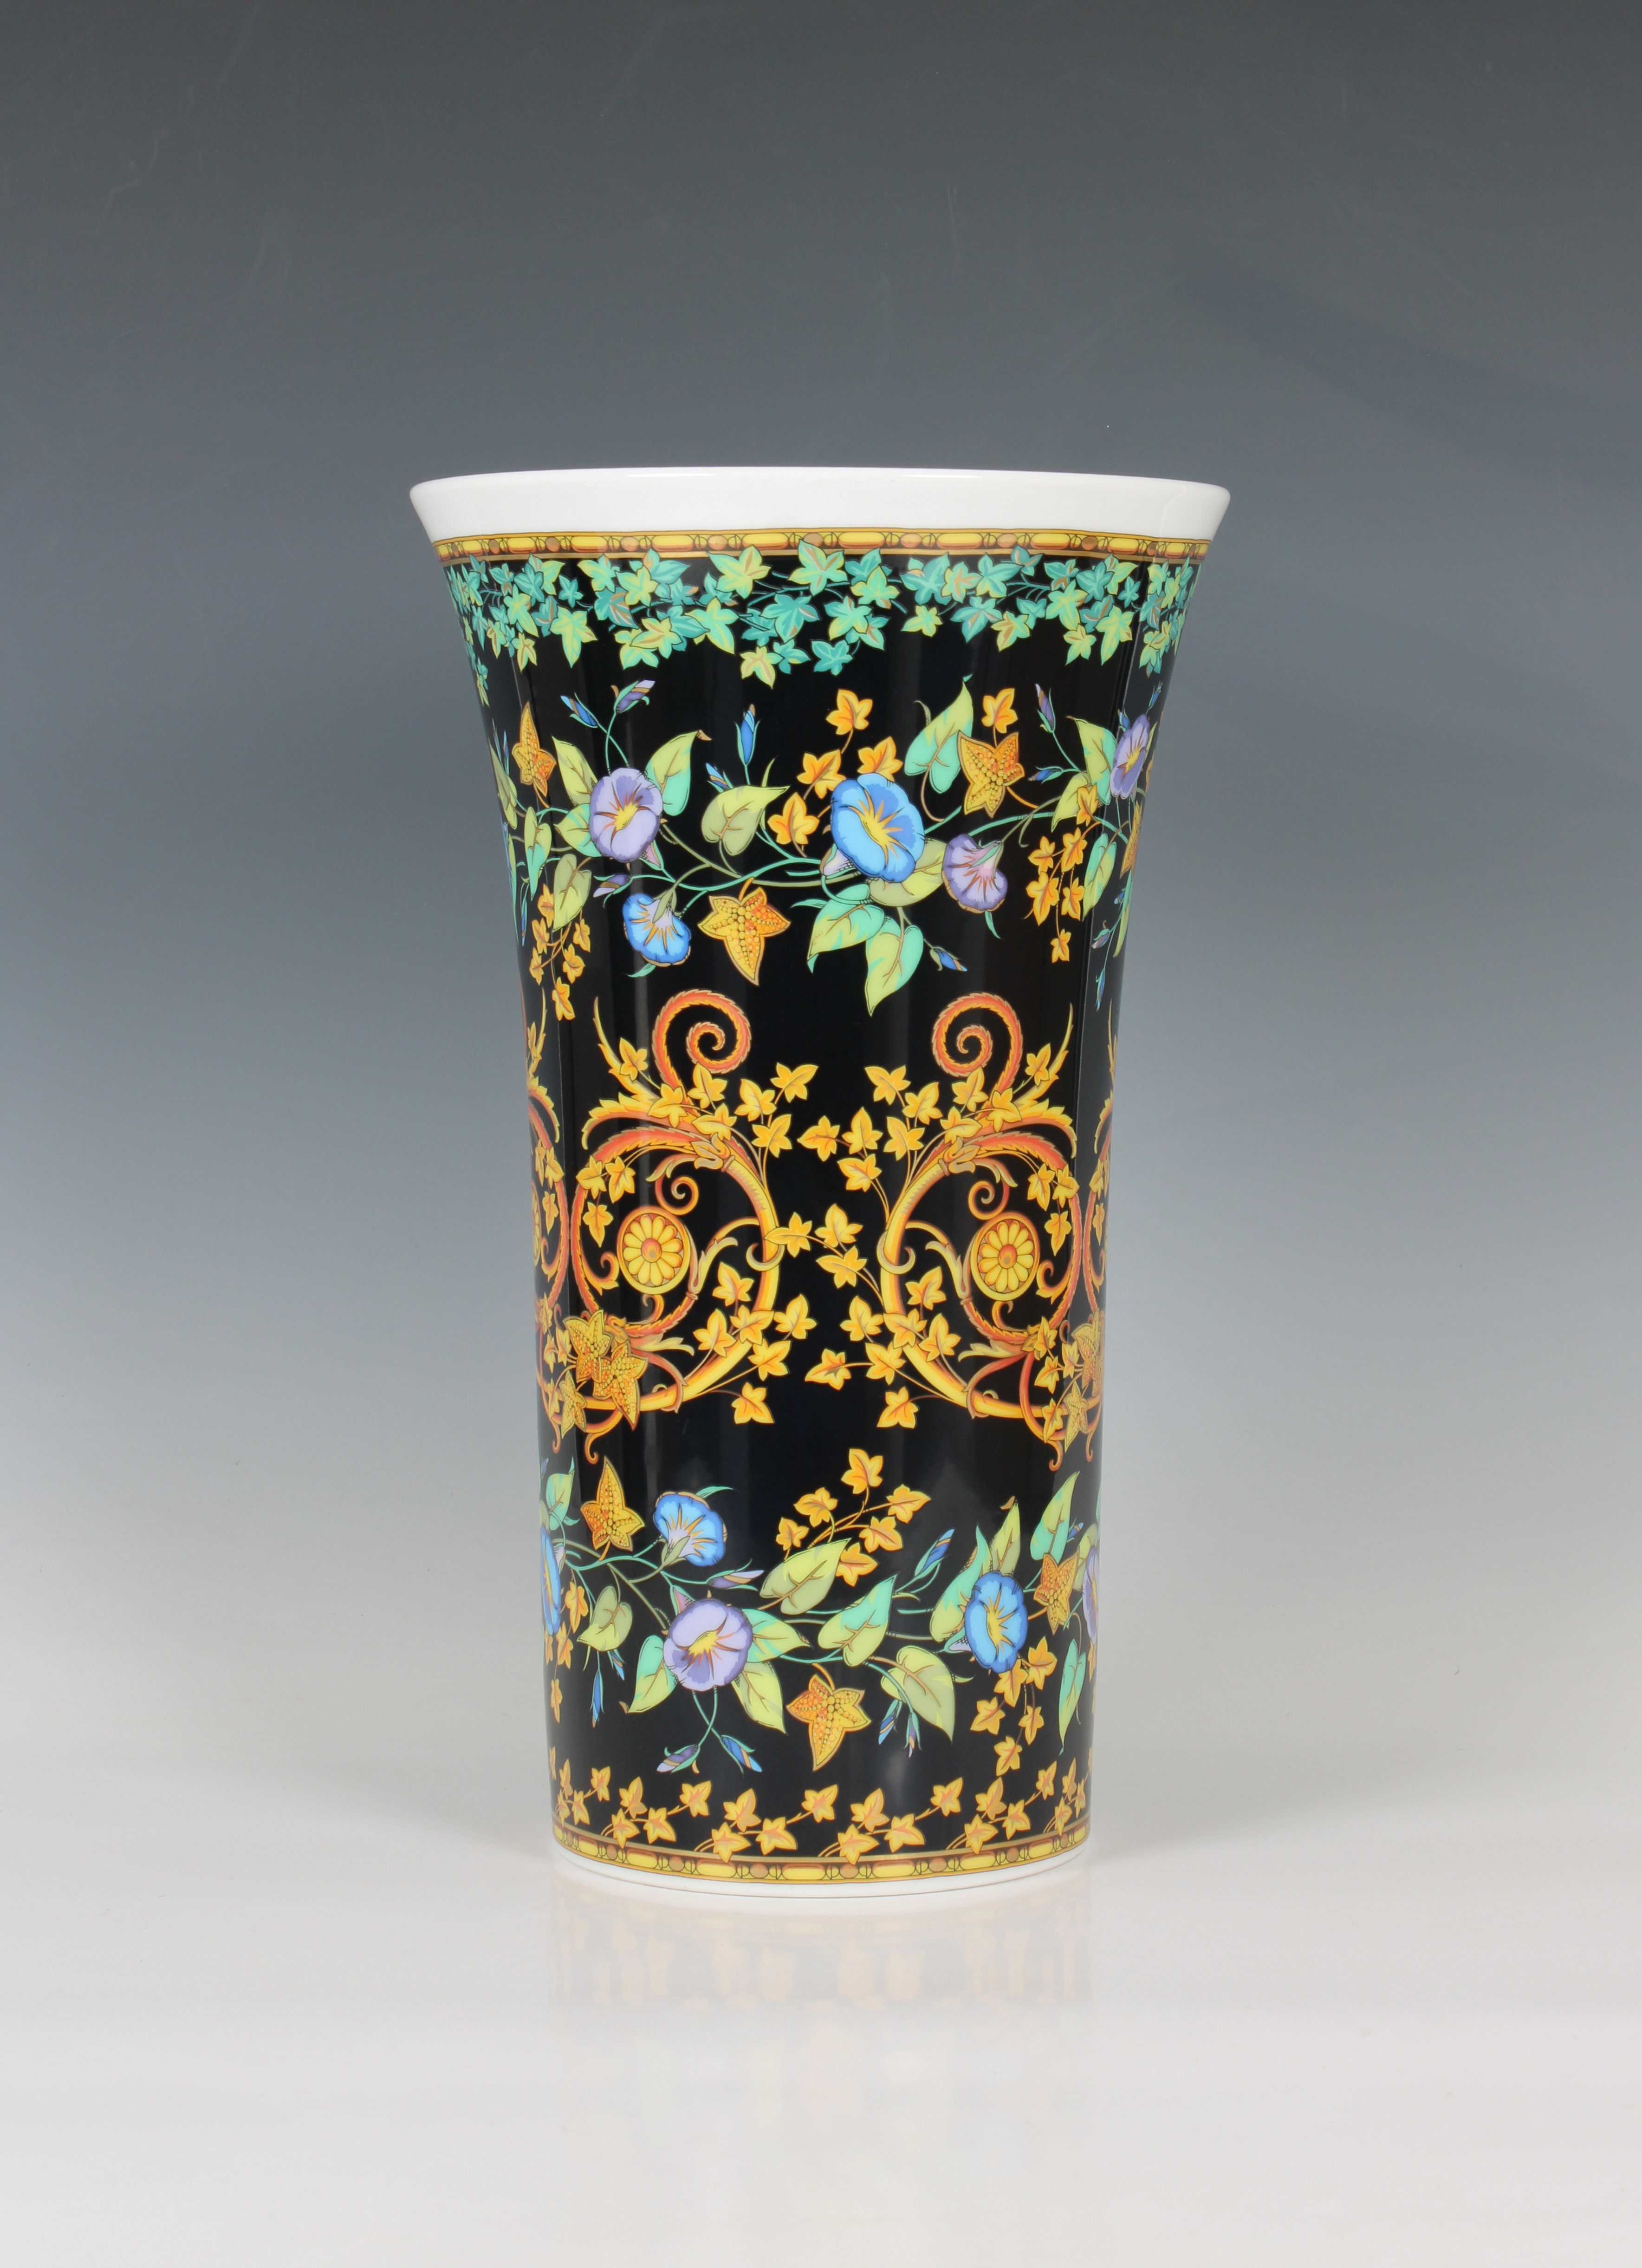 A Rosenthal Versace 'Gold Ivy' cylindrical flared vase, foliate design with gilded highlights - Image 2 of 3